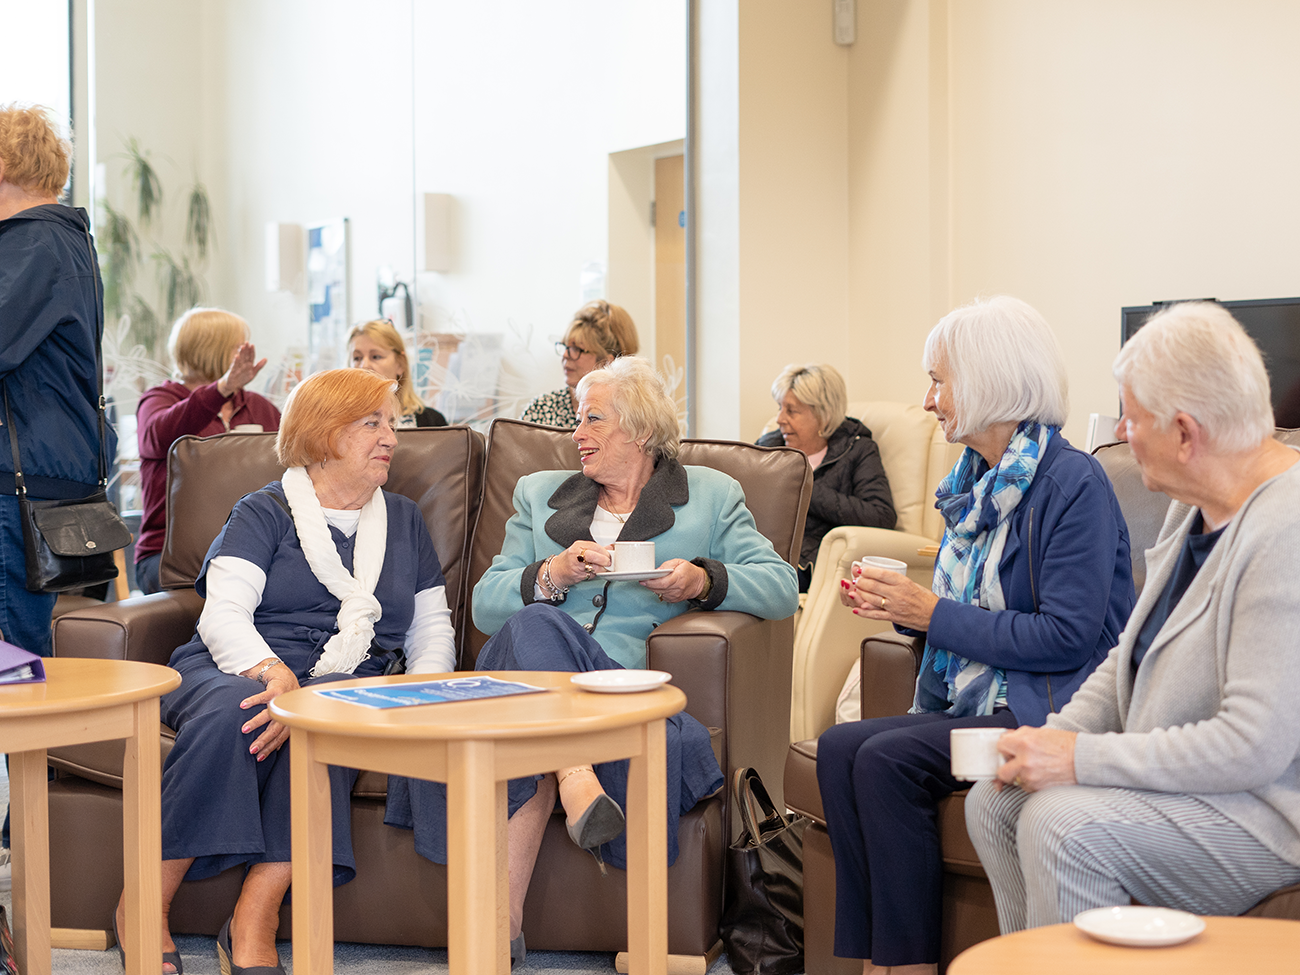 Group of elderly ladies sitting on chairs with wooden tables in front, at the St Barnabas Wellbeing Centre in Louth.